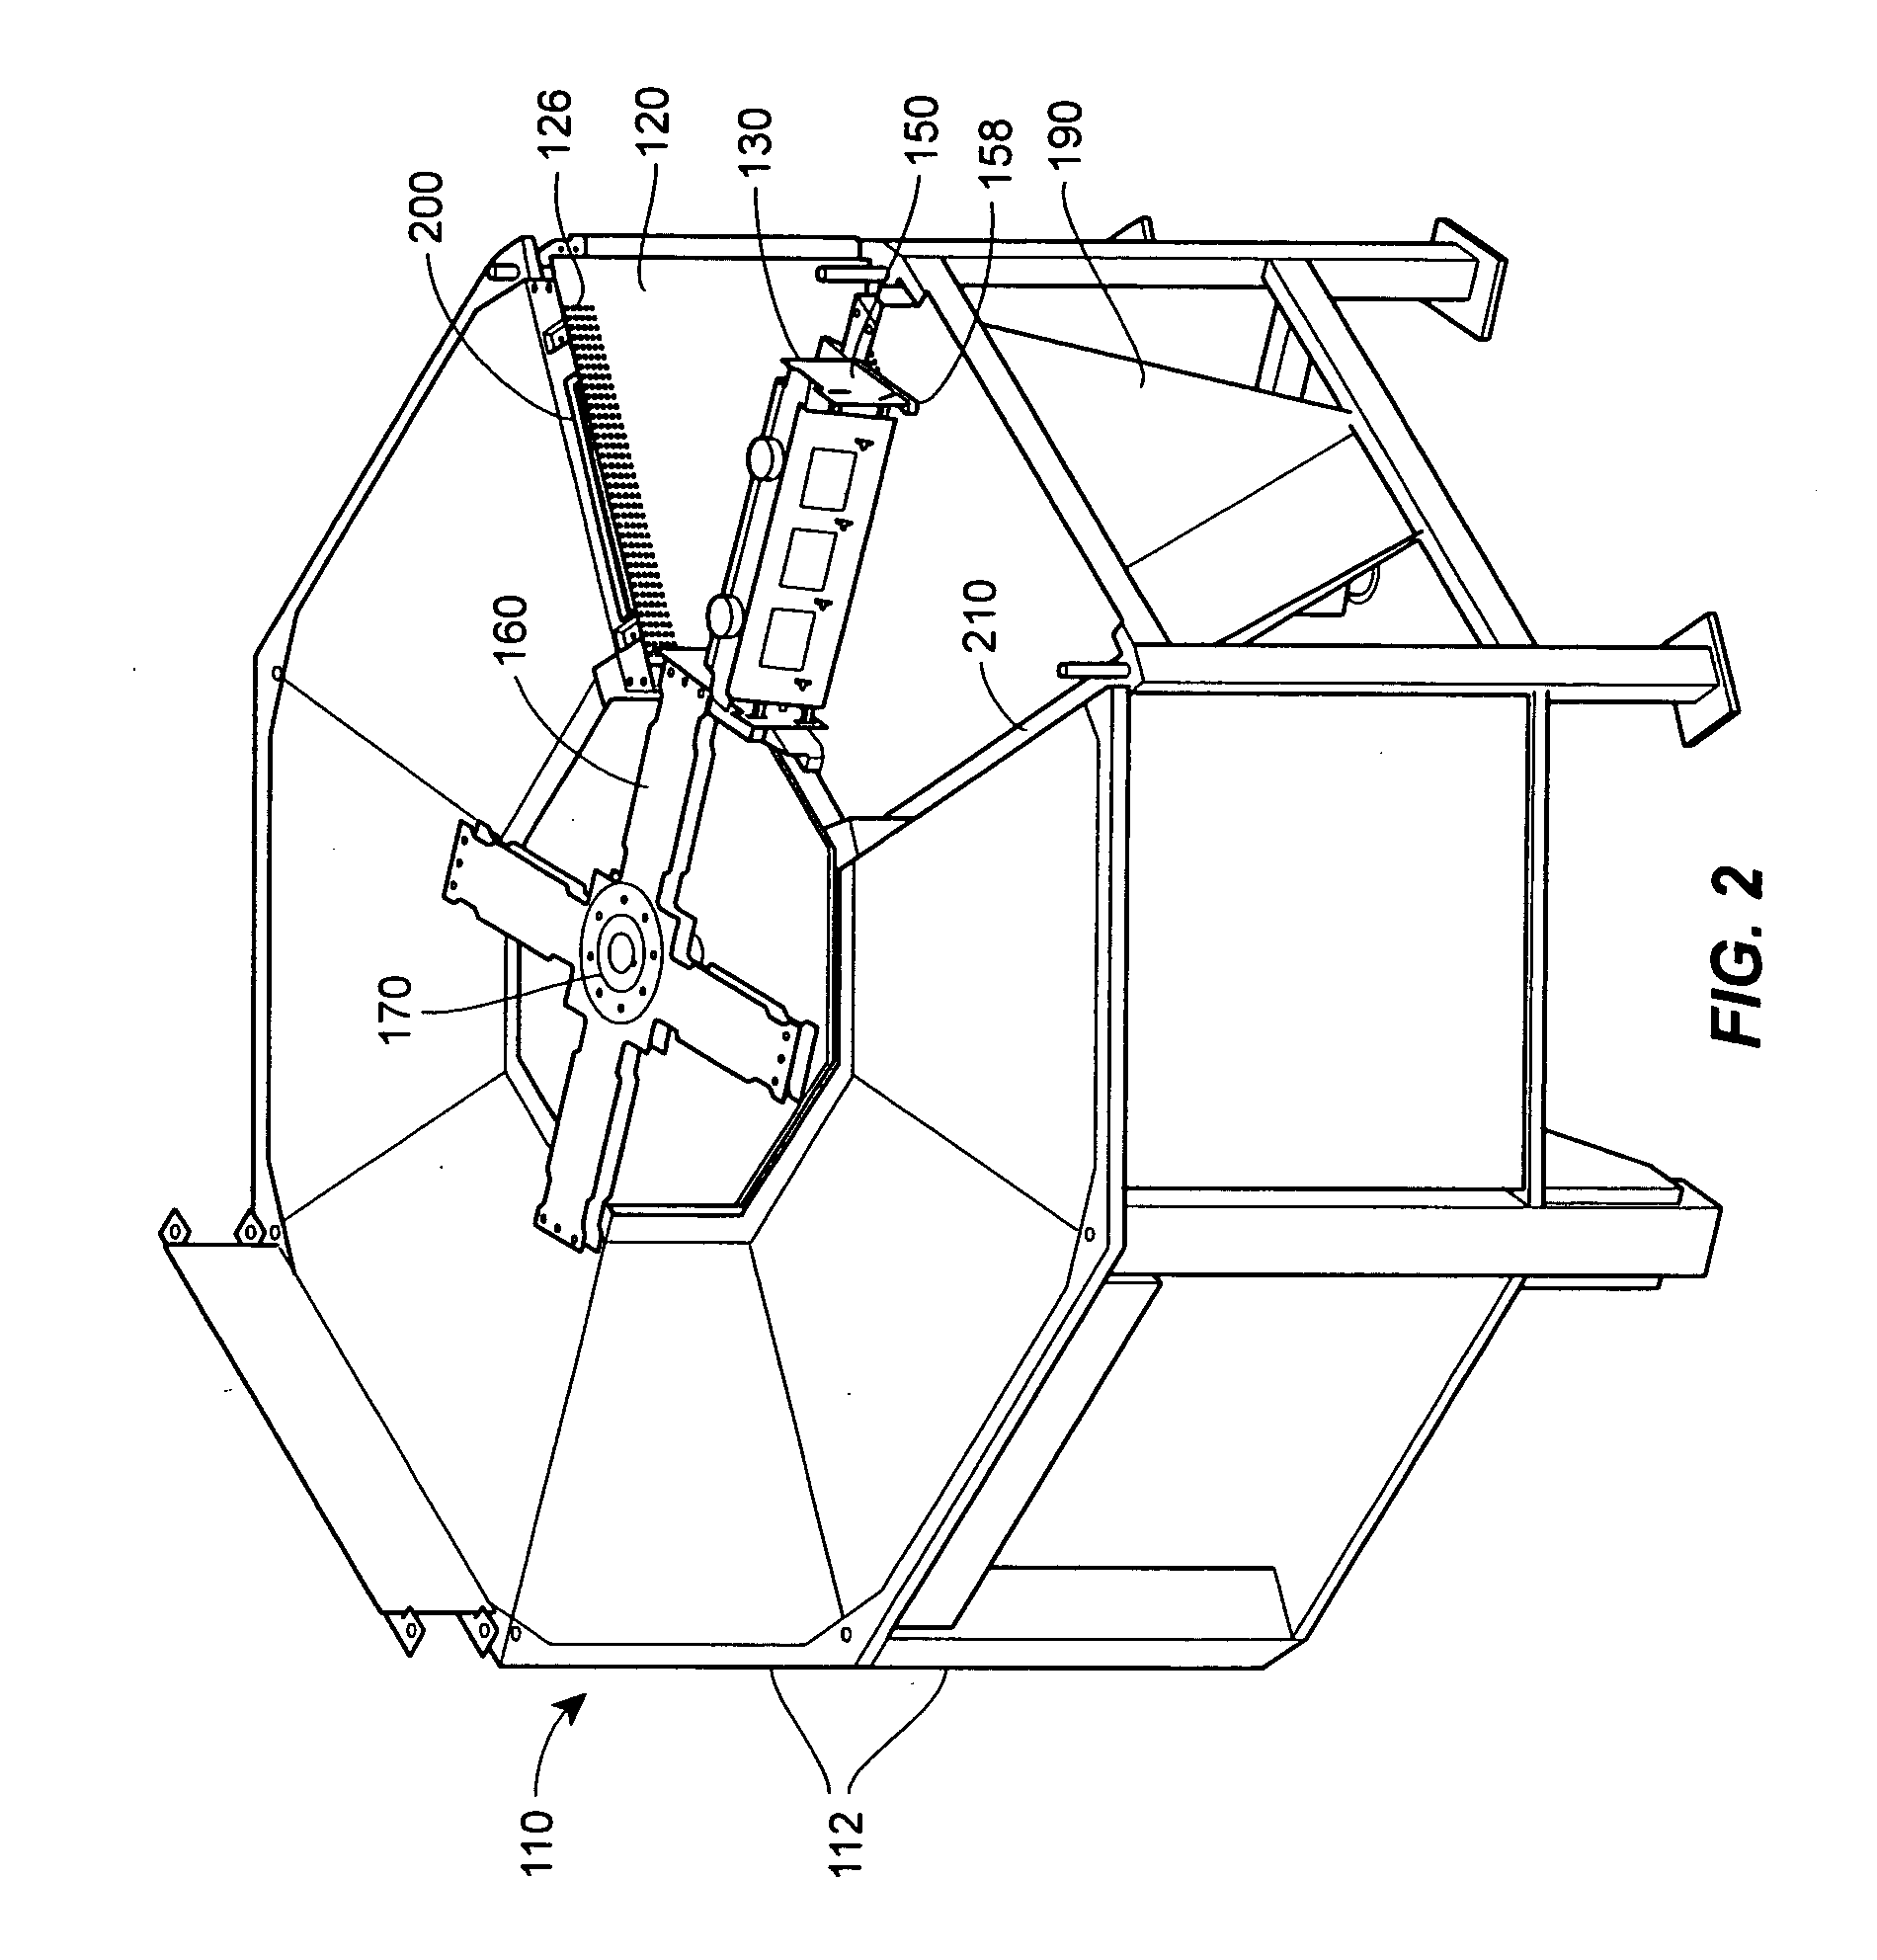 Method and apparatus for removal of grape seeds from grape skin